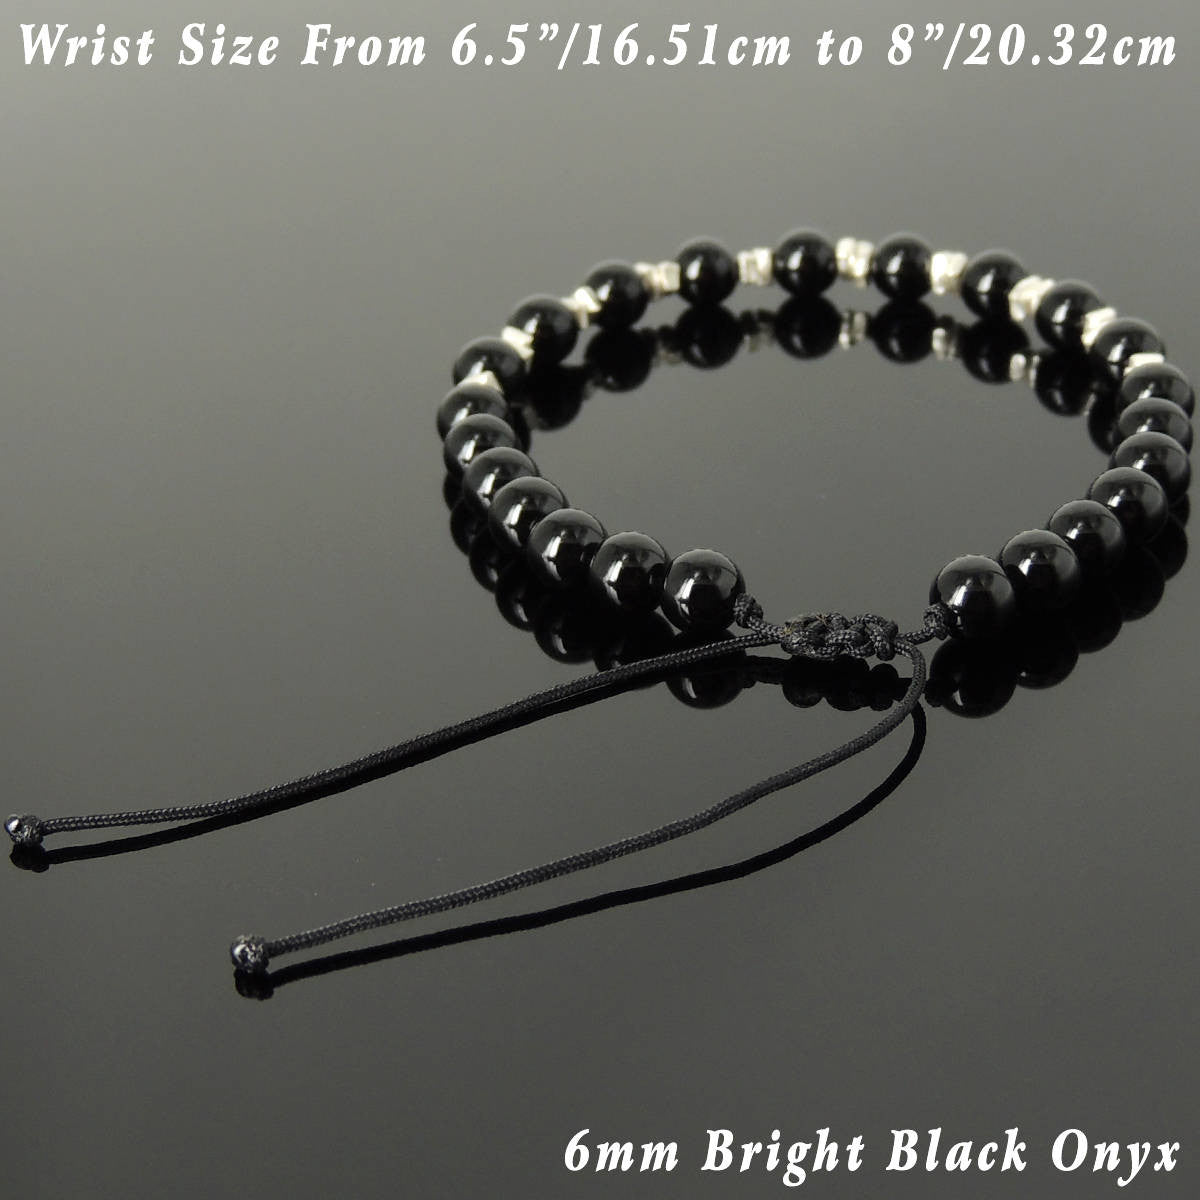 6mm Bright Black Onyx Adjustable Braided Bracelet with S925 Sterling Silver Nugget Beads - Handmade by Gem & Silver BR1109